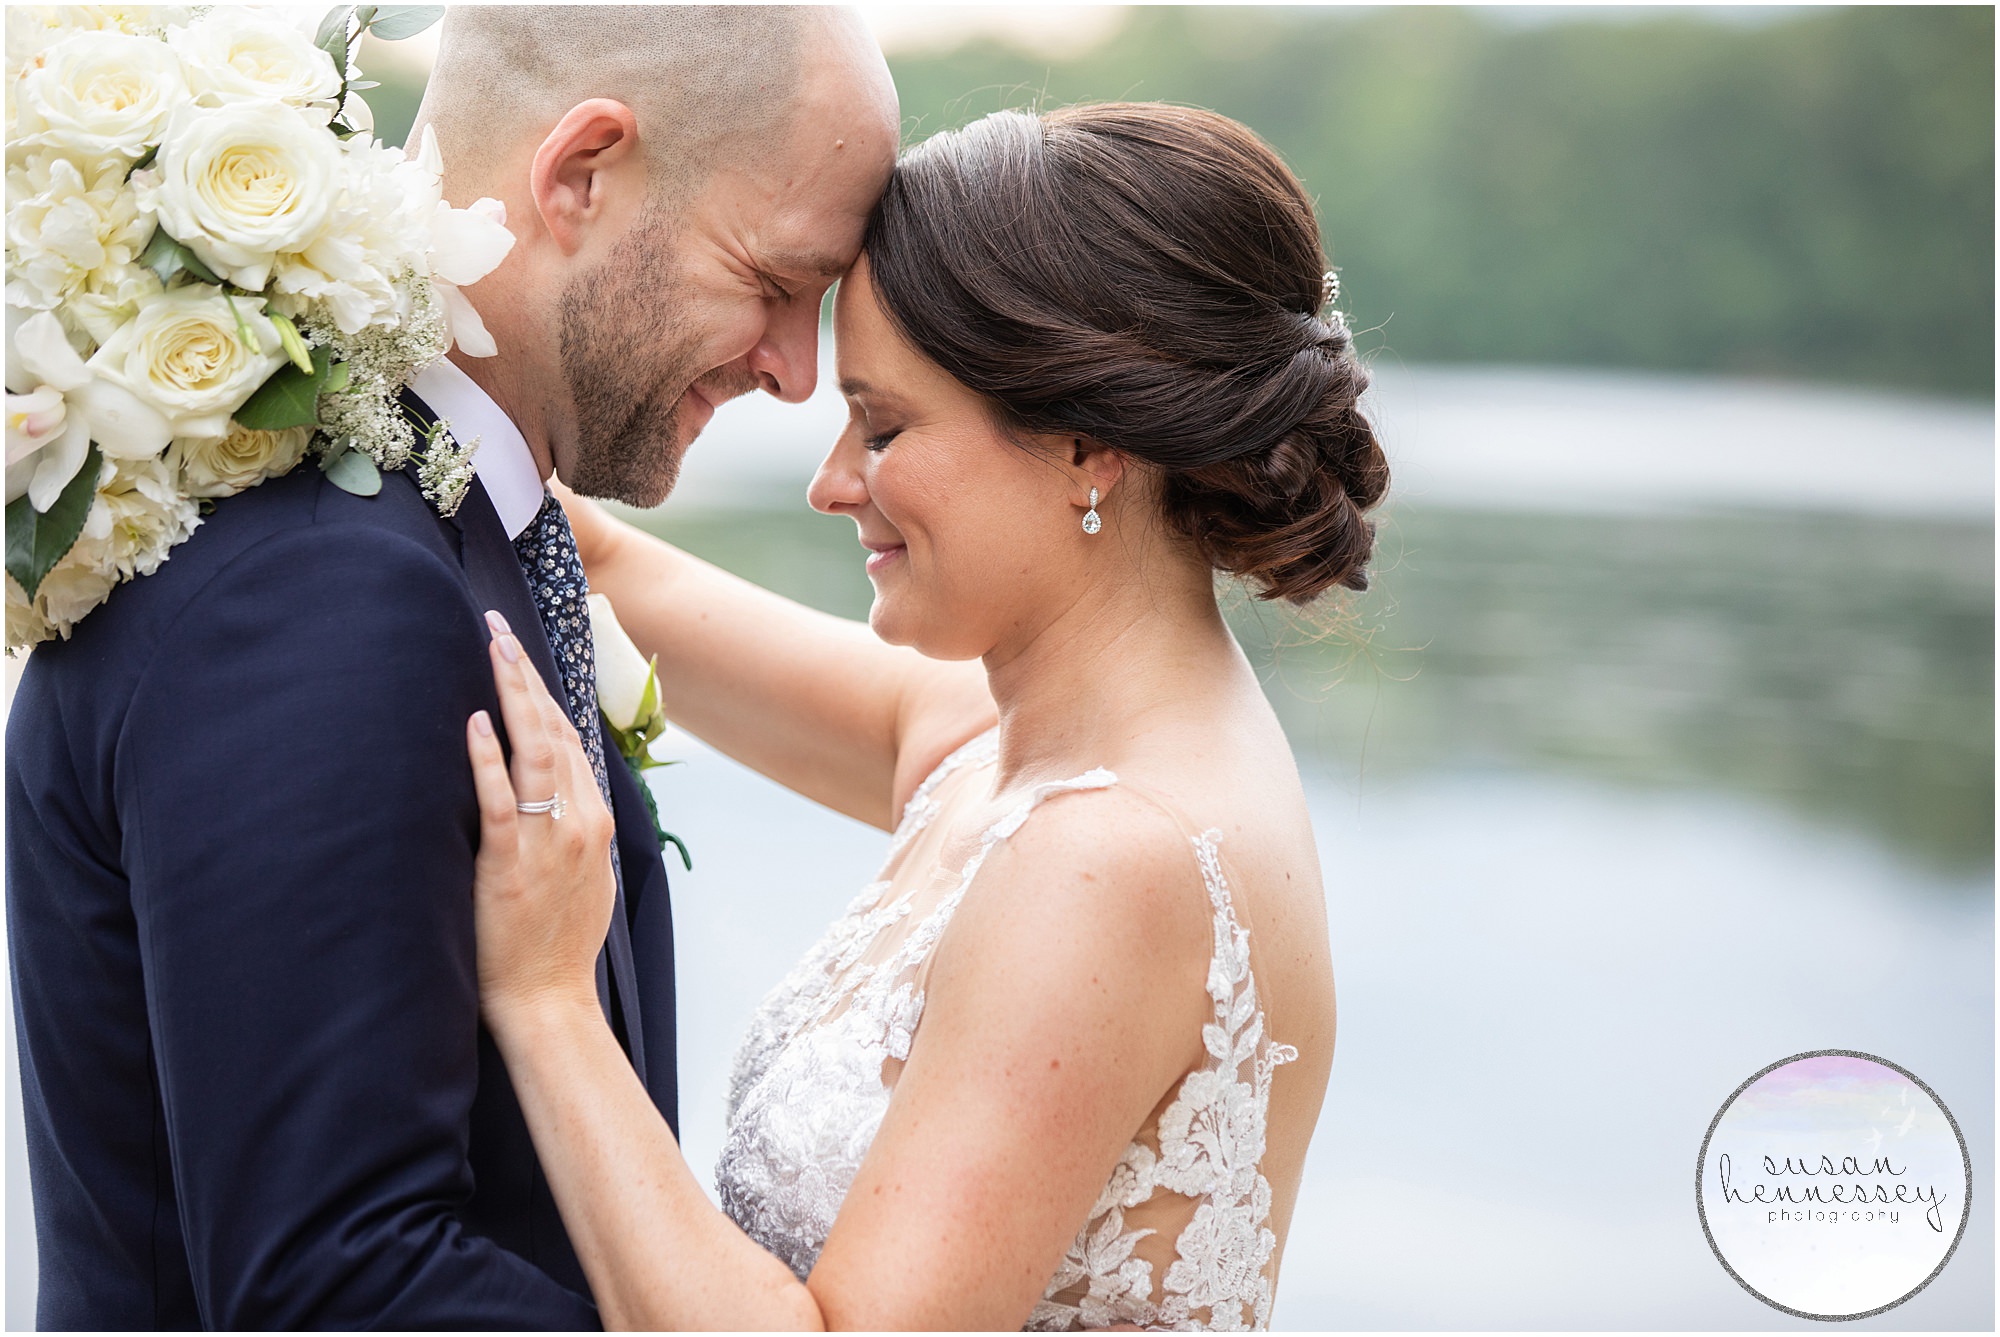 Susan Hennessey Photography Best of 2020 Weddings - South Jersey lake house wedding bride and groom portraits